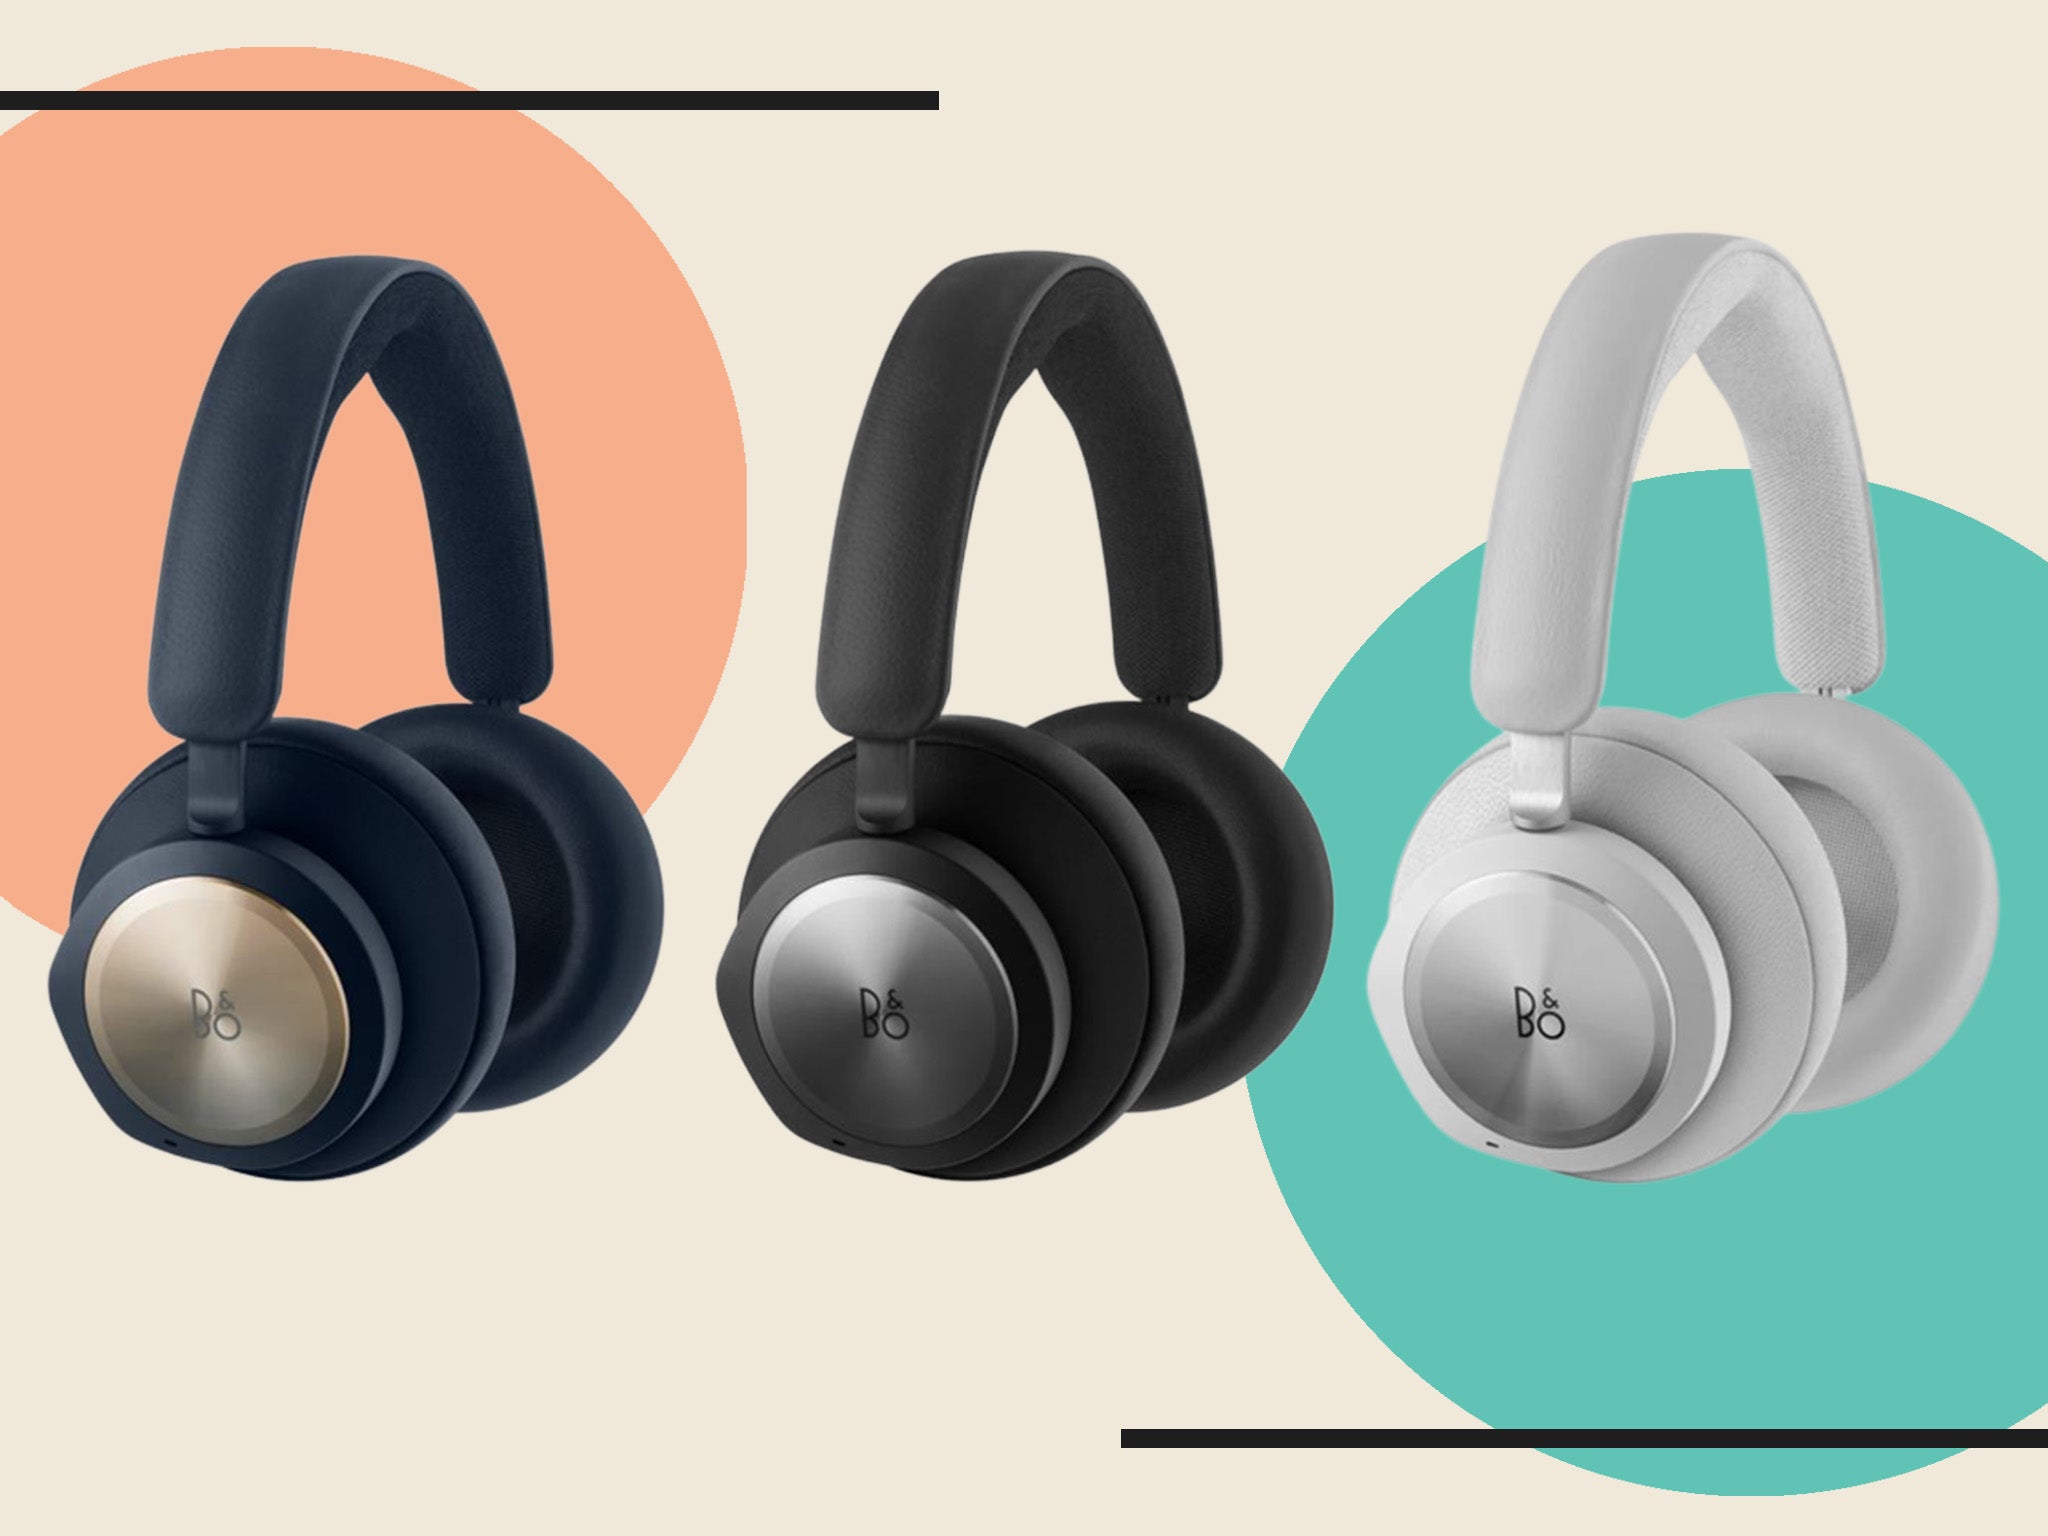 We tested the headphones’ noise-cancelling system and its matching app